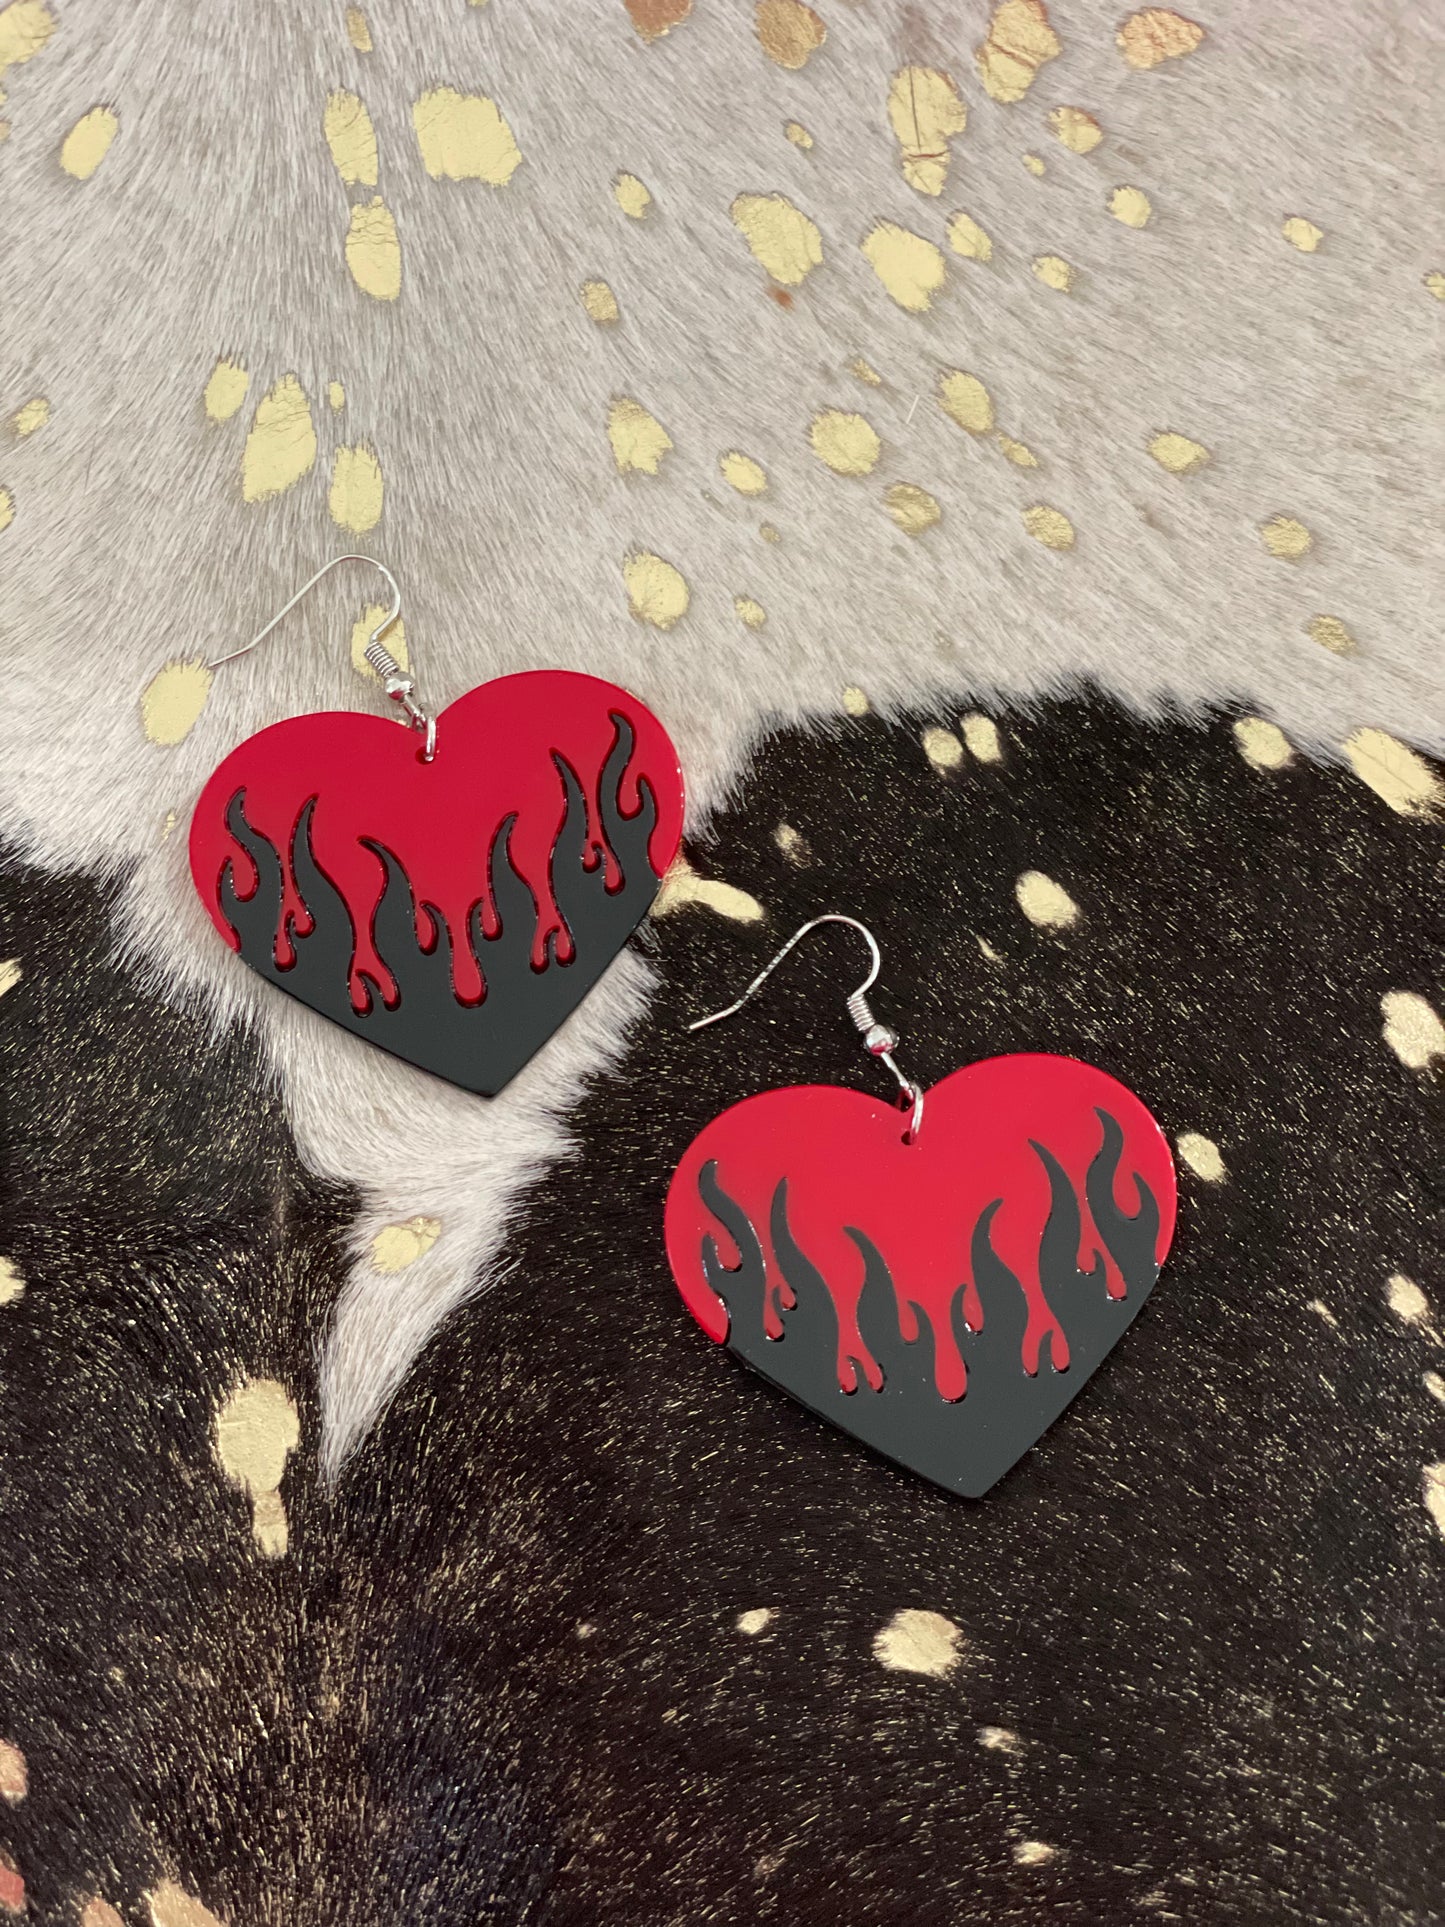 Big red heart dangly earrings with black flames.